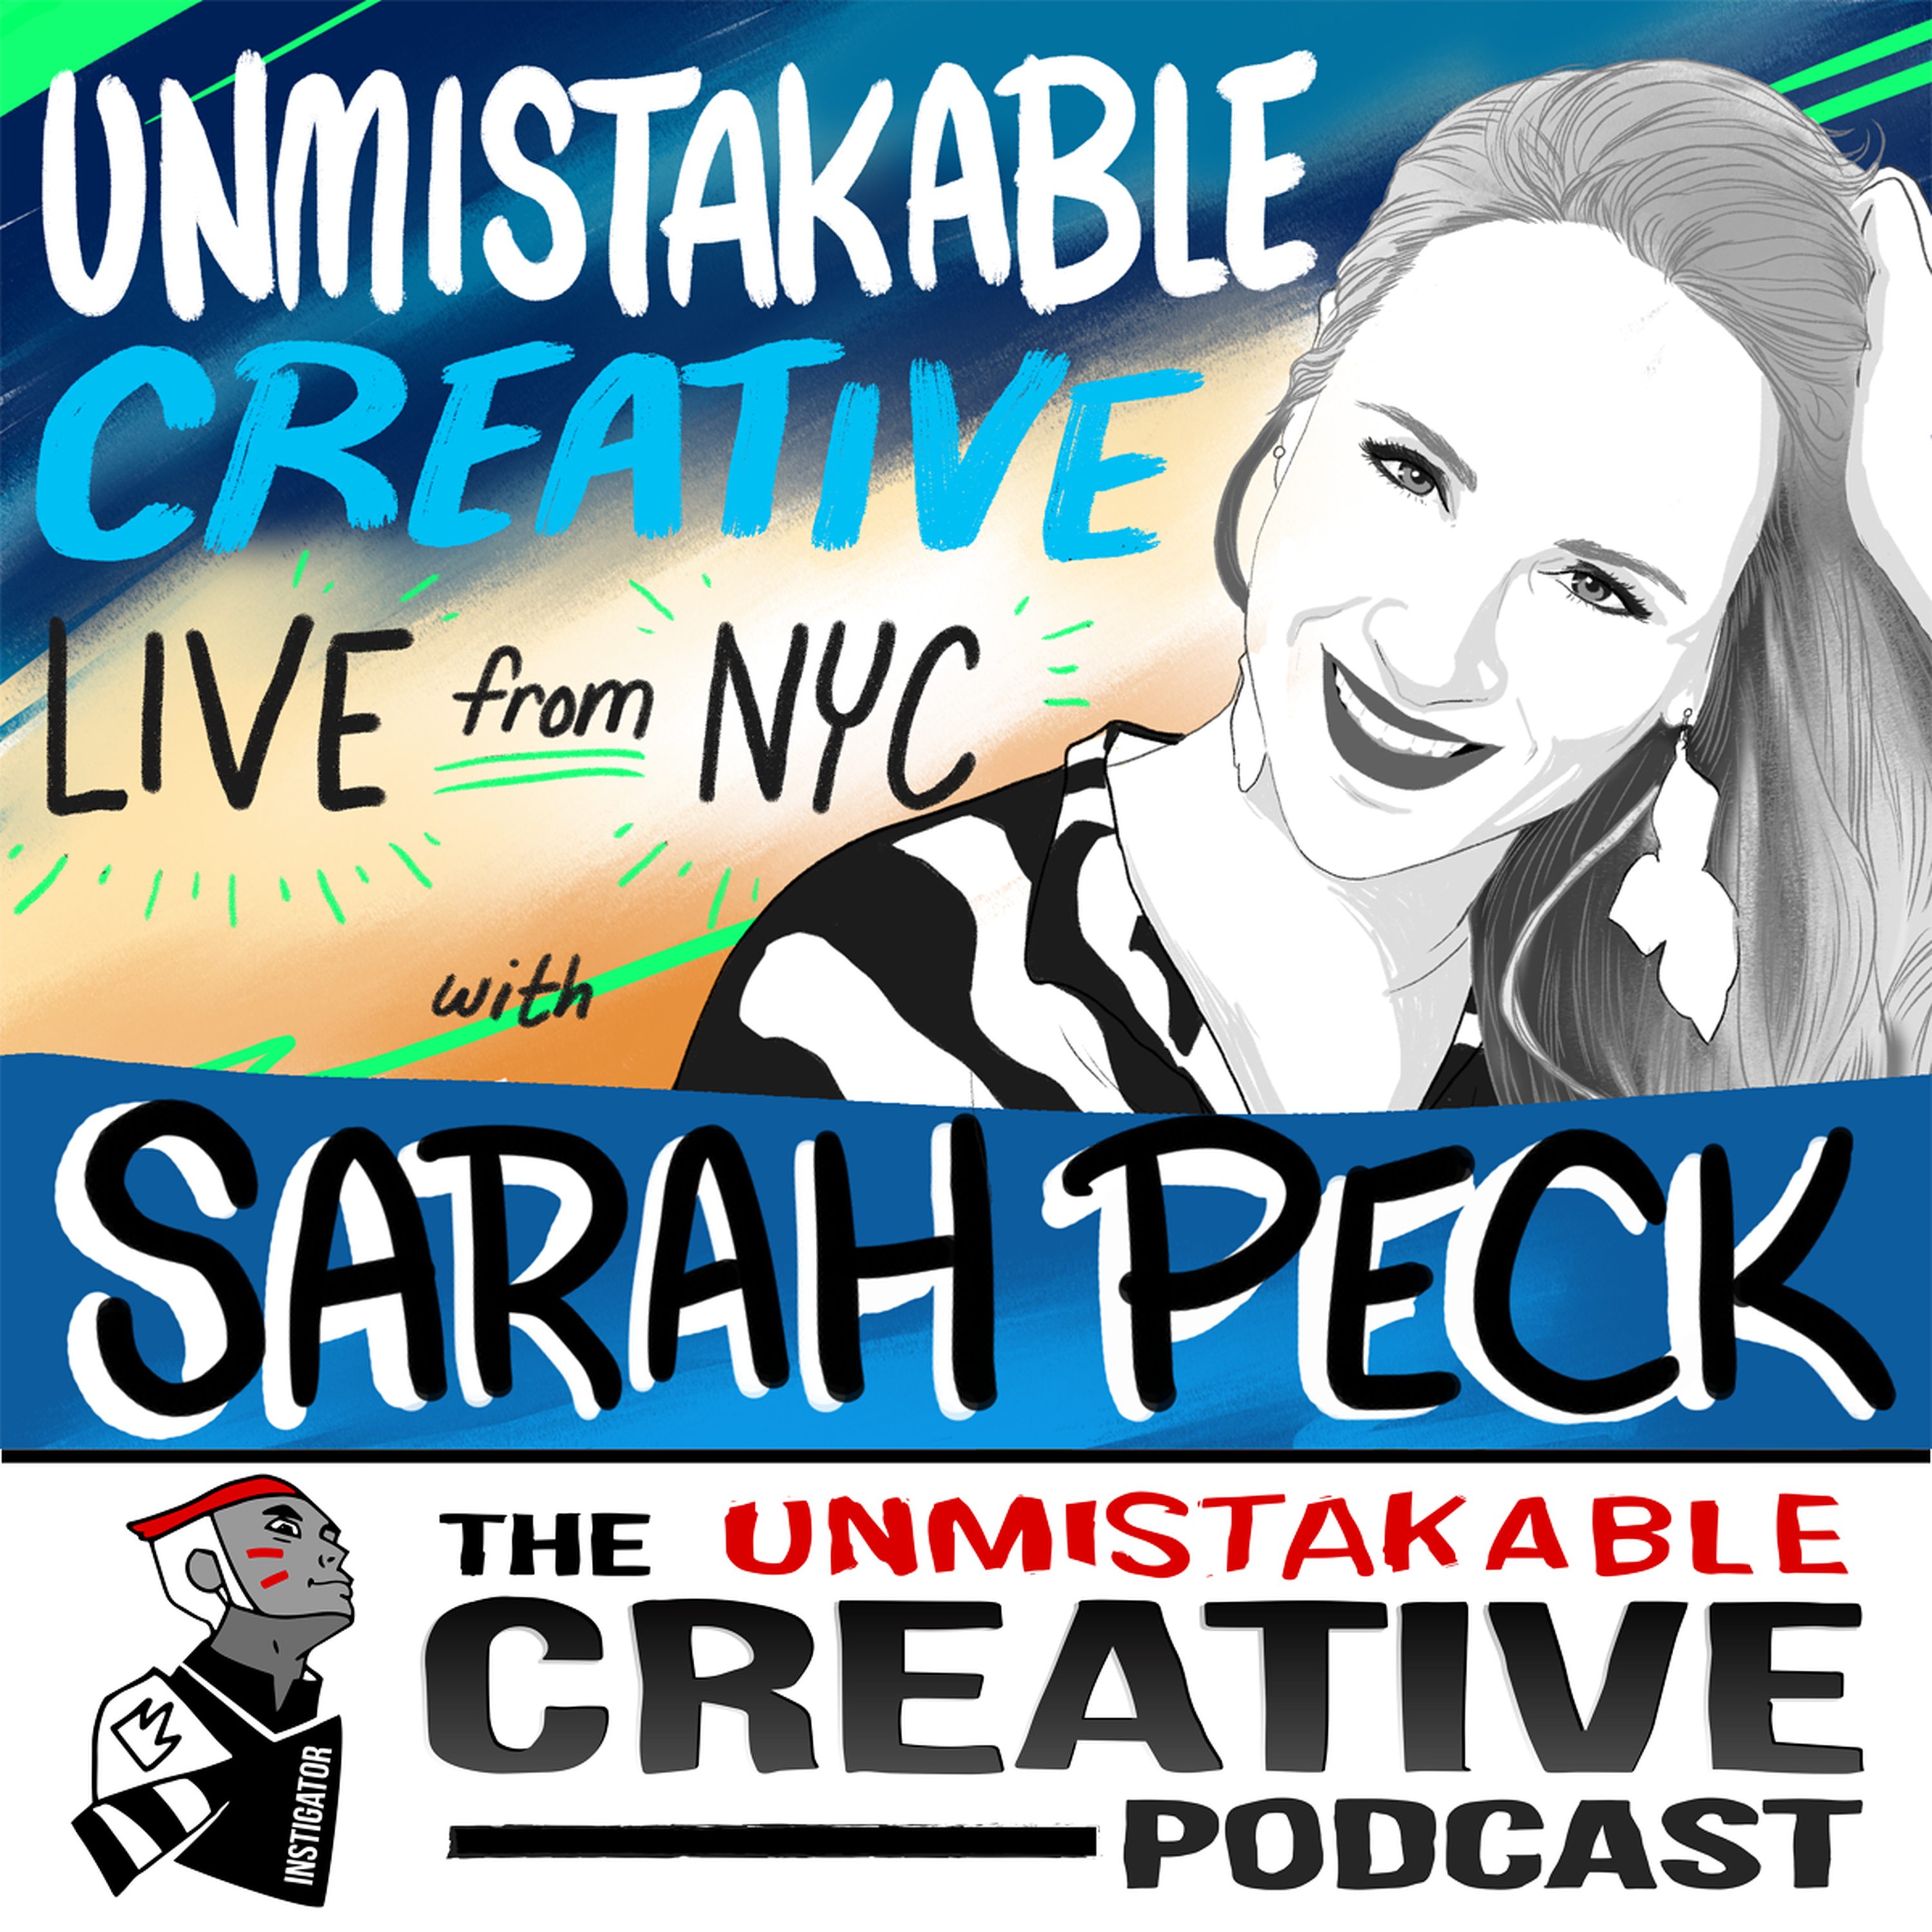 Unmistakable Creative Live from NYC with Sarah Peck Image